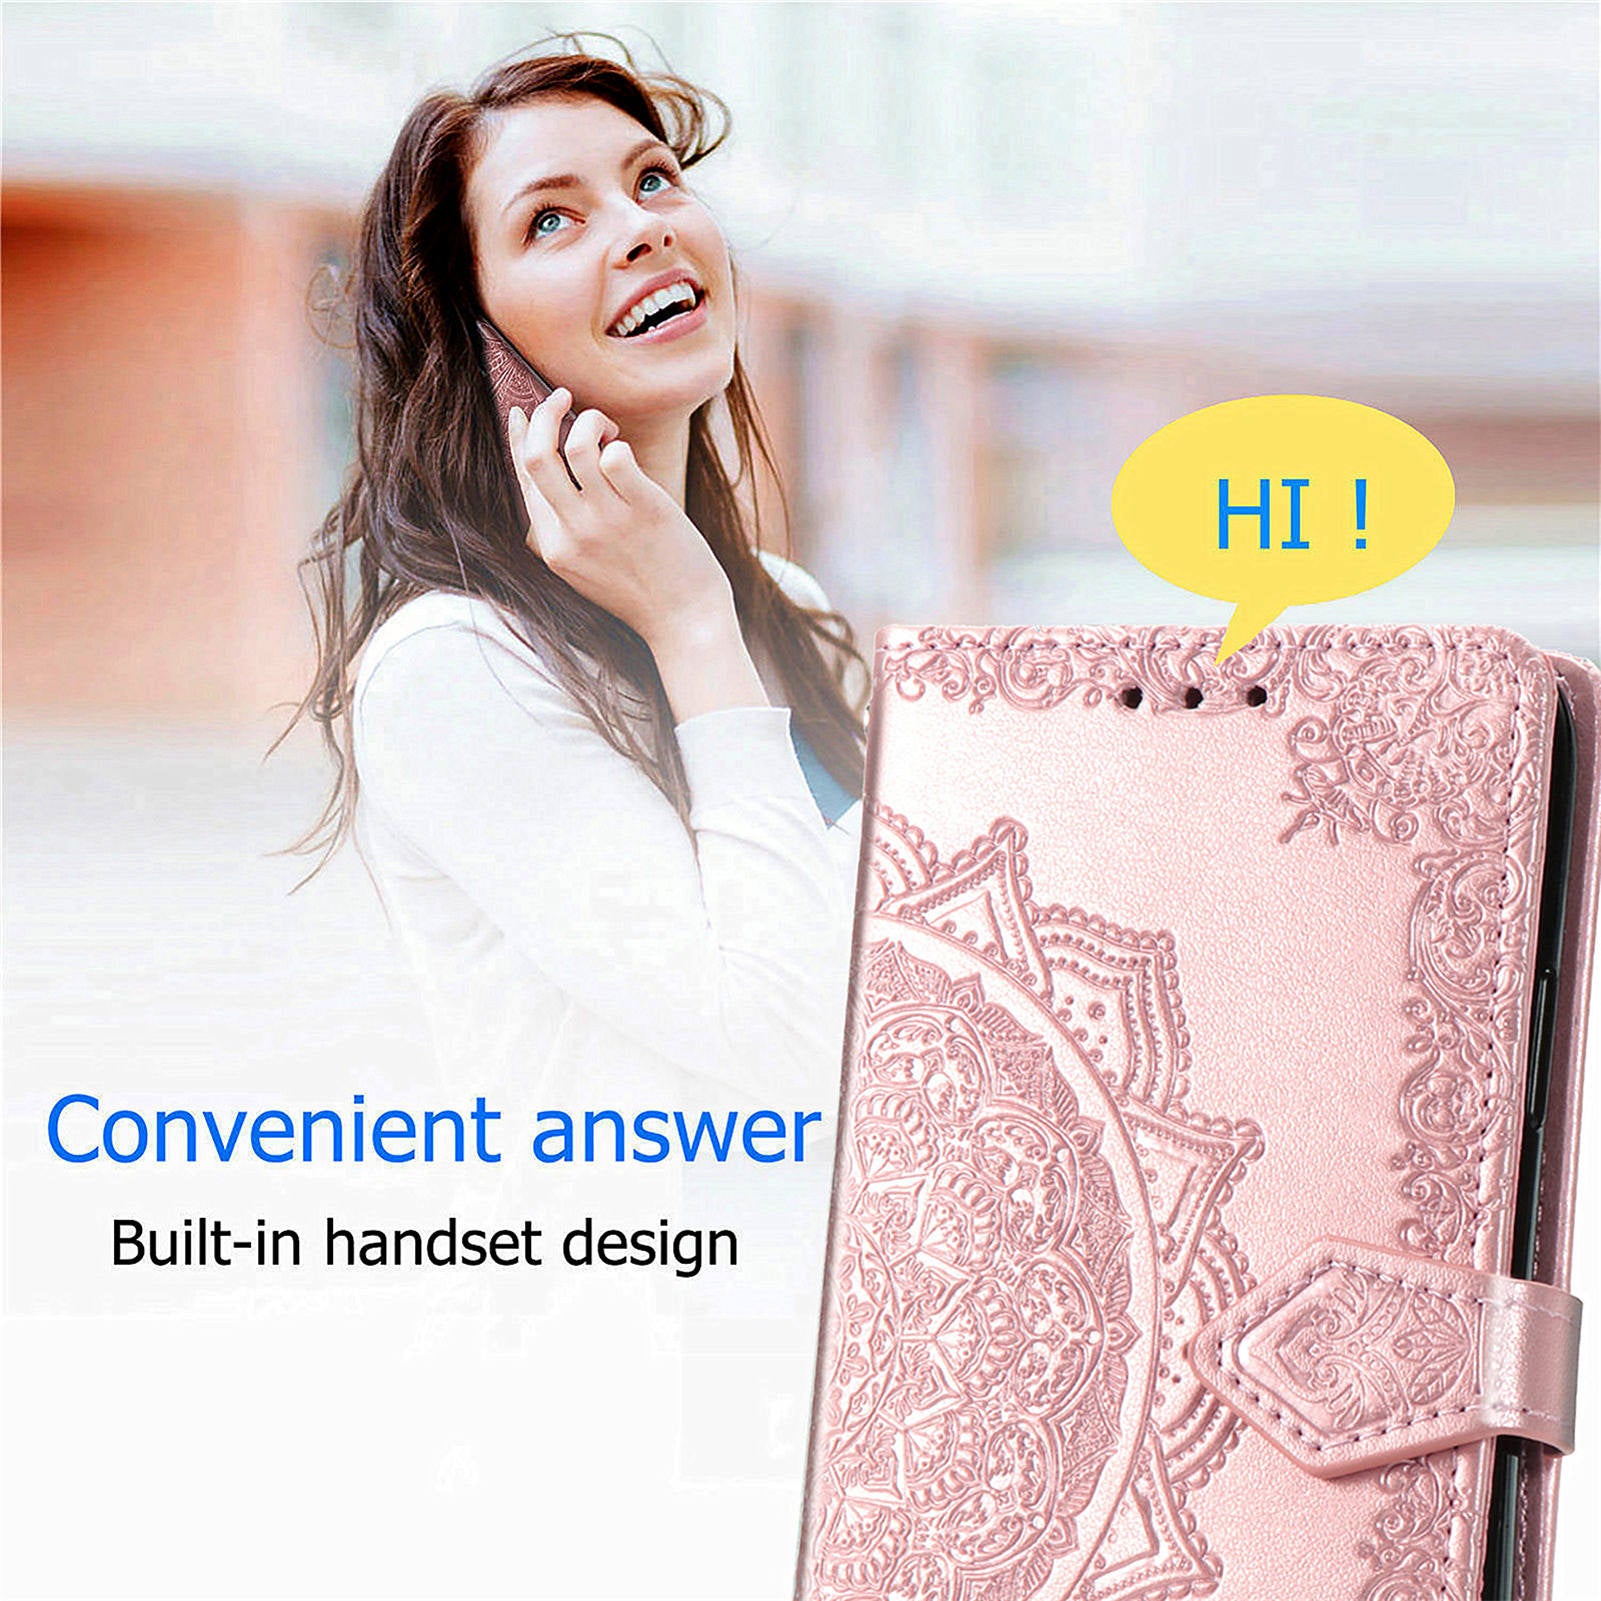 For Transsion Tecno Spark 20 Pro+ Case PU Leather Phone Shell Emboss Mandala Flower Wallet Cover - Rose Gold